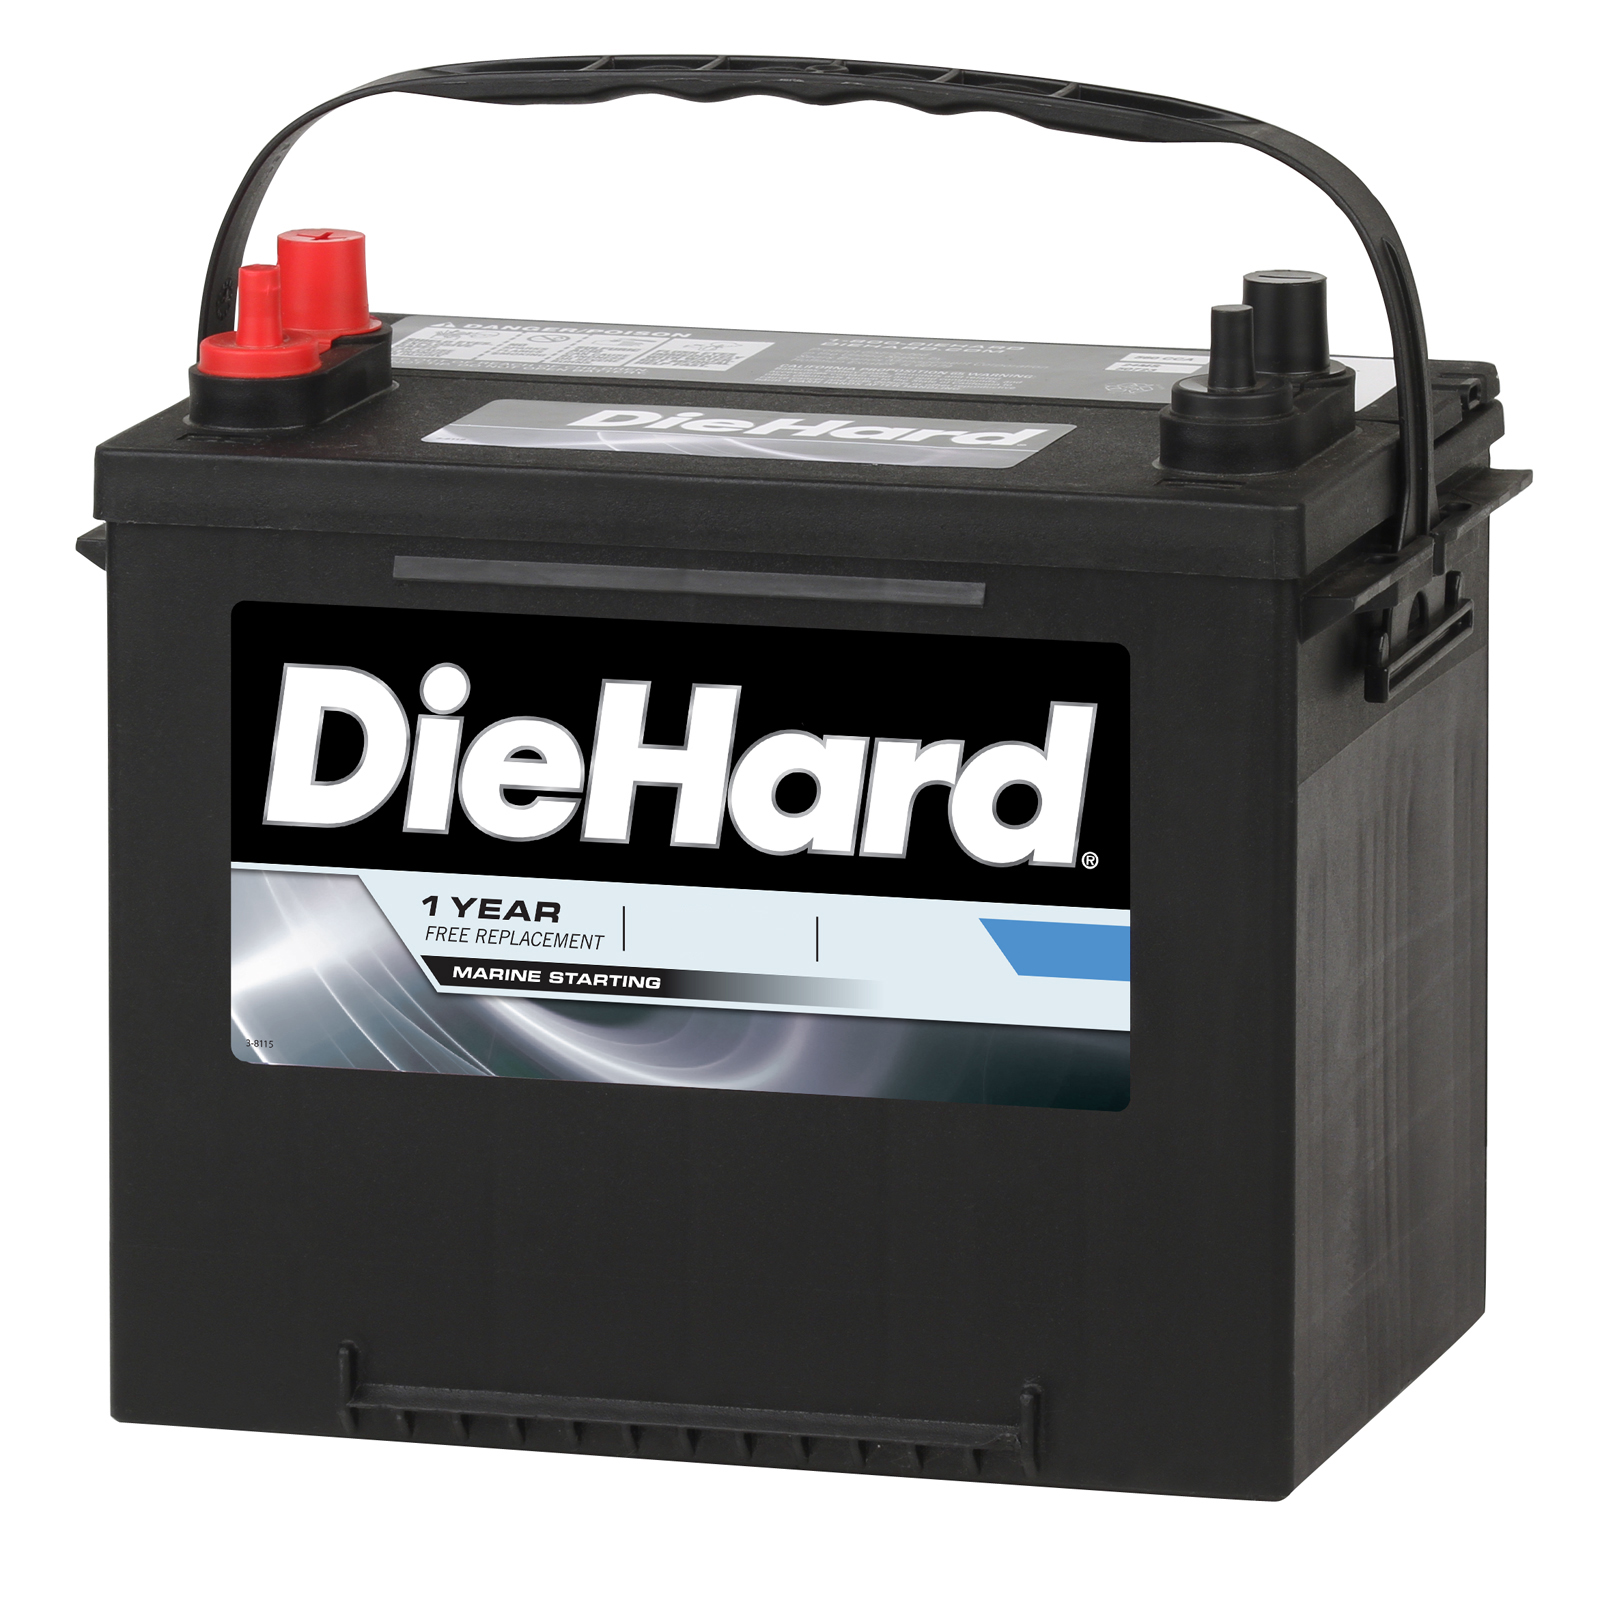 DieHard Marine Starting Battery 24MS - Group Size EP-24MS (Price with Exchange)